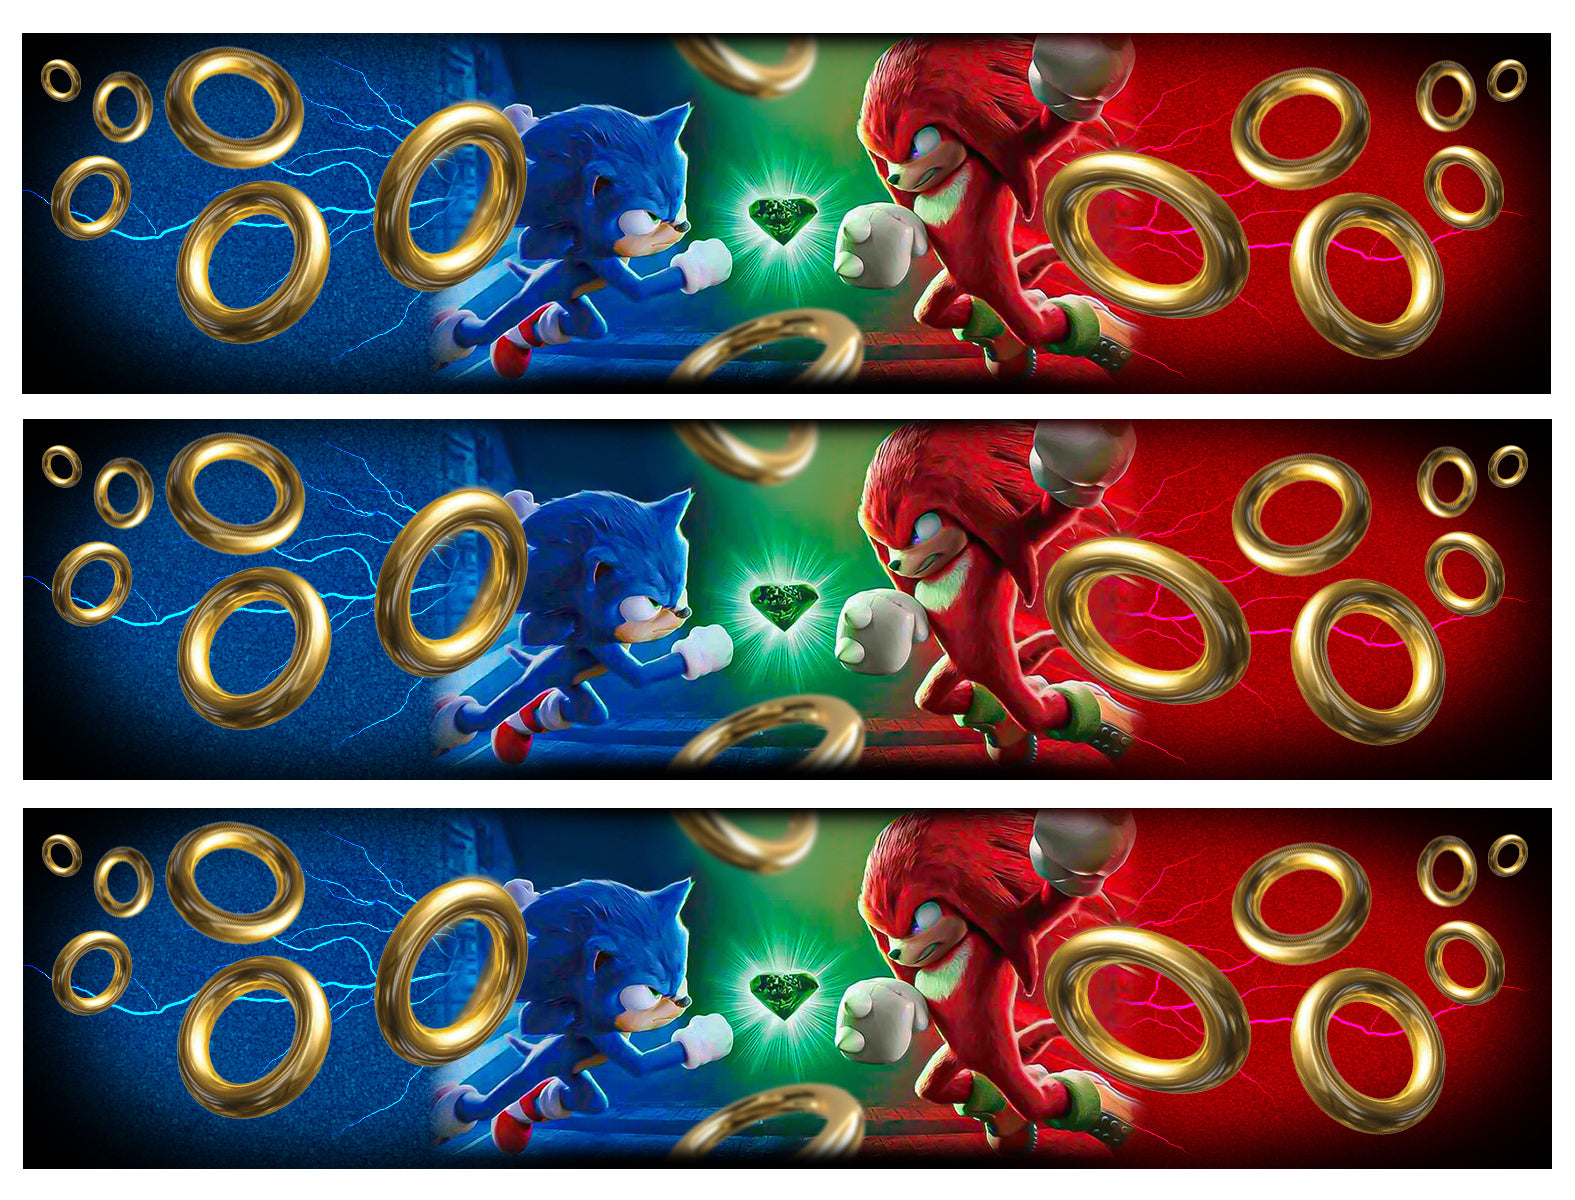 Sonic the Hedgehog 2 Knuckles the Echinada Gold Rings Edible Cake Topper Image Strips ABPID56288